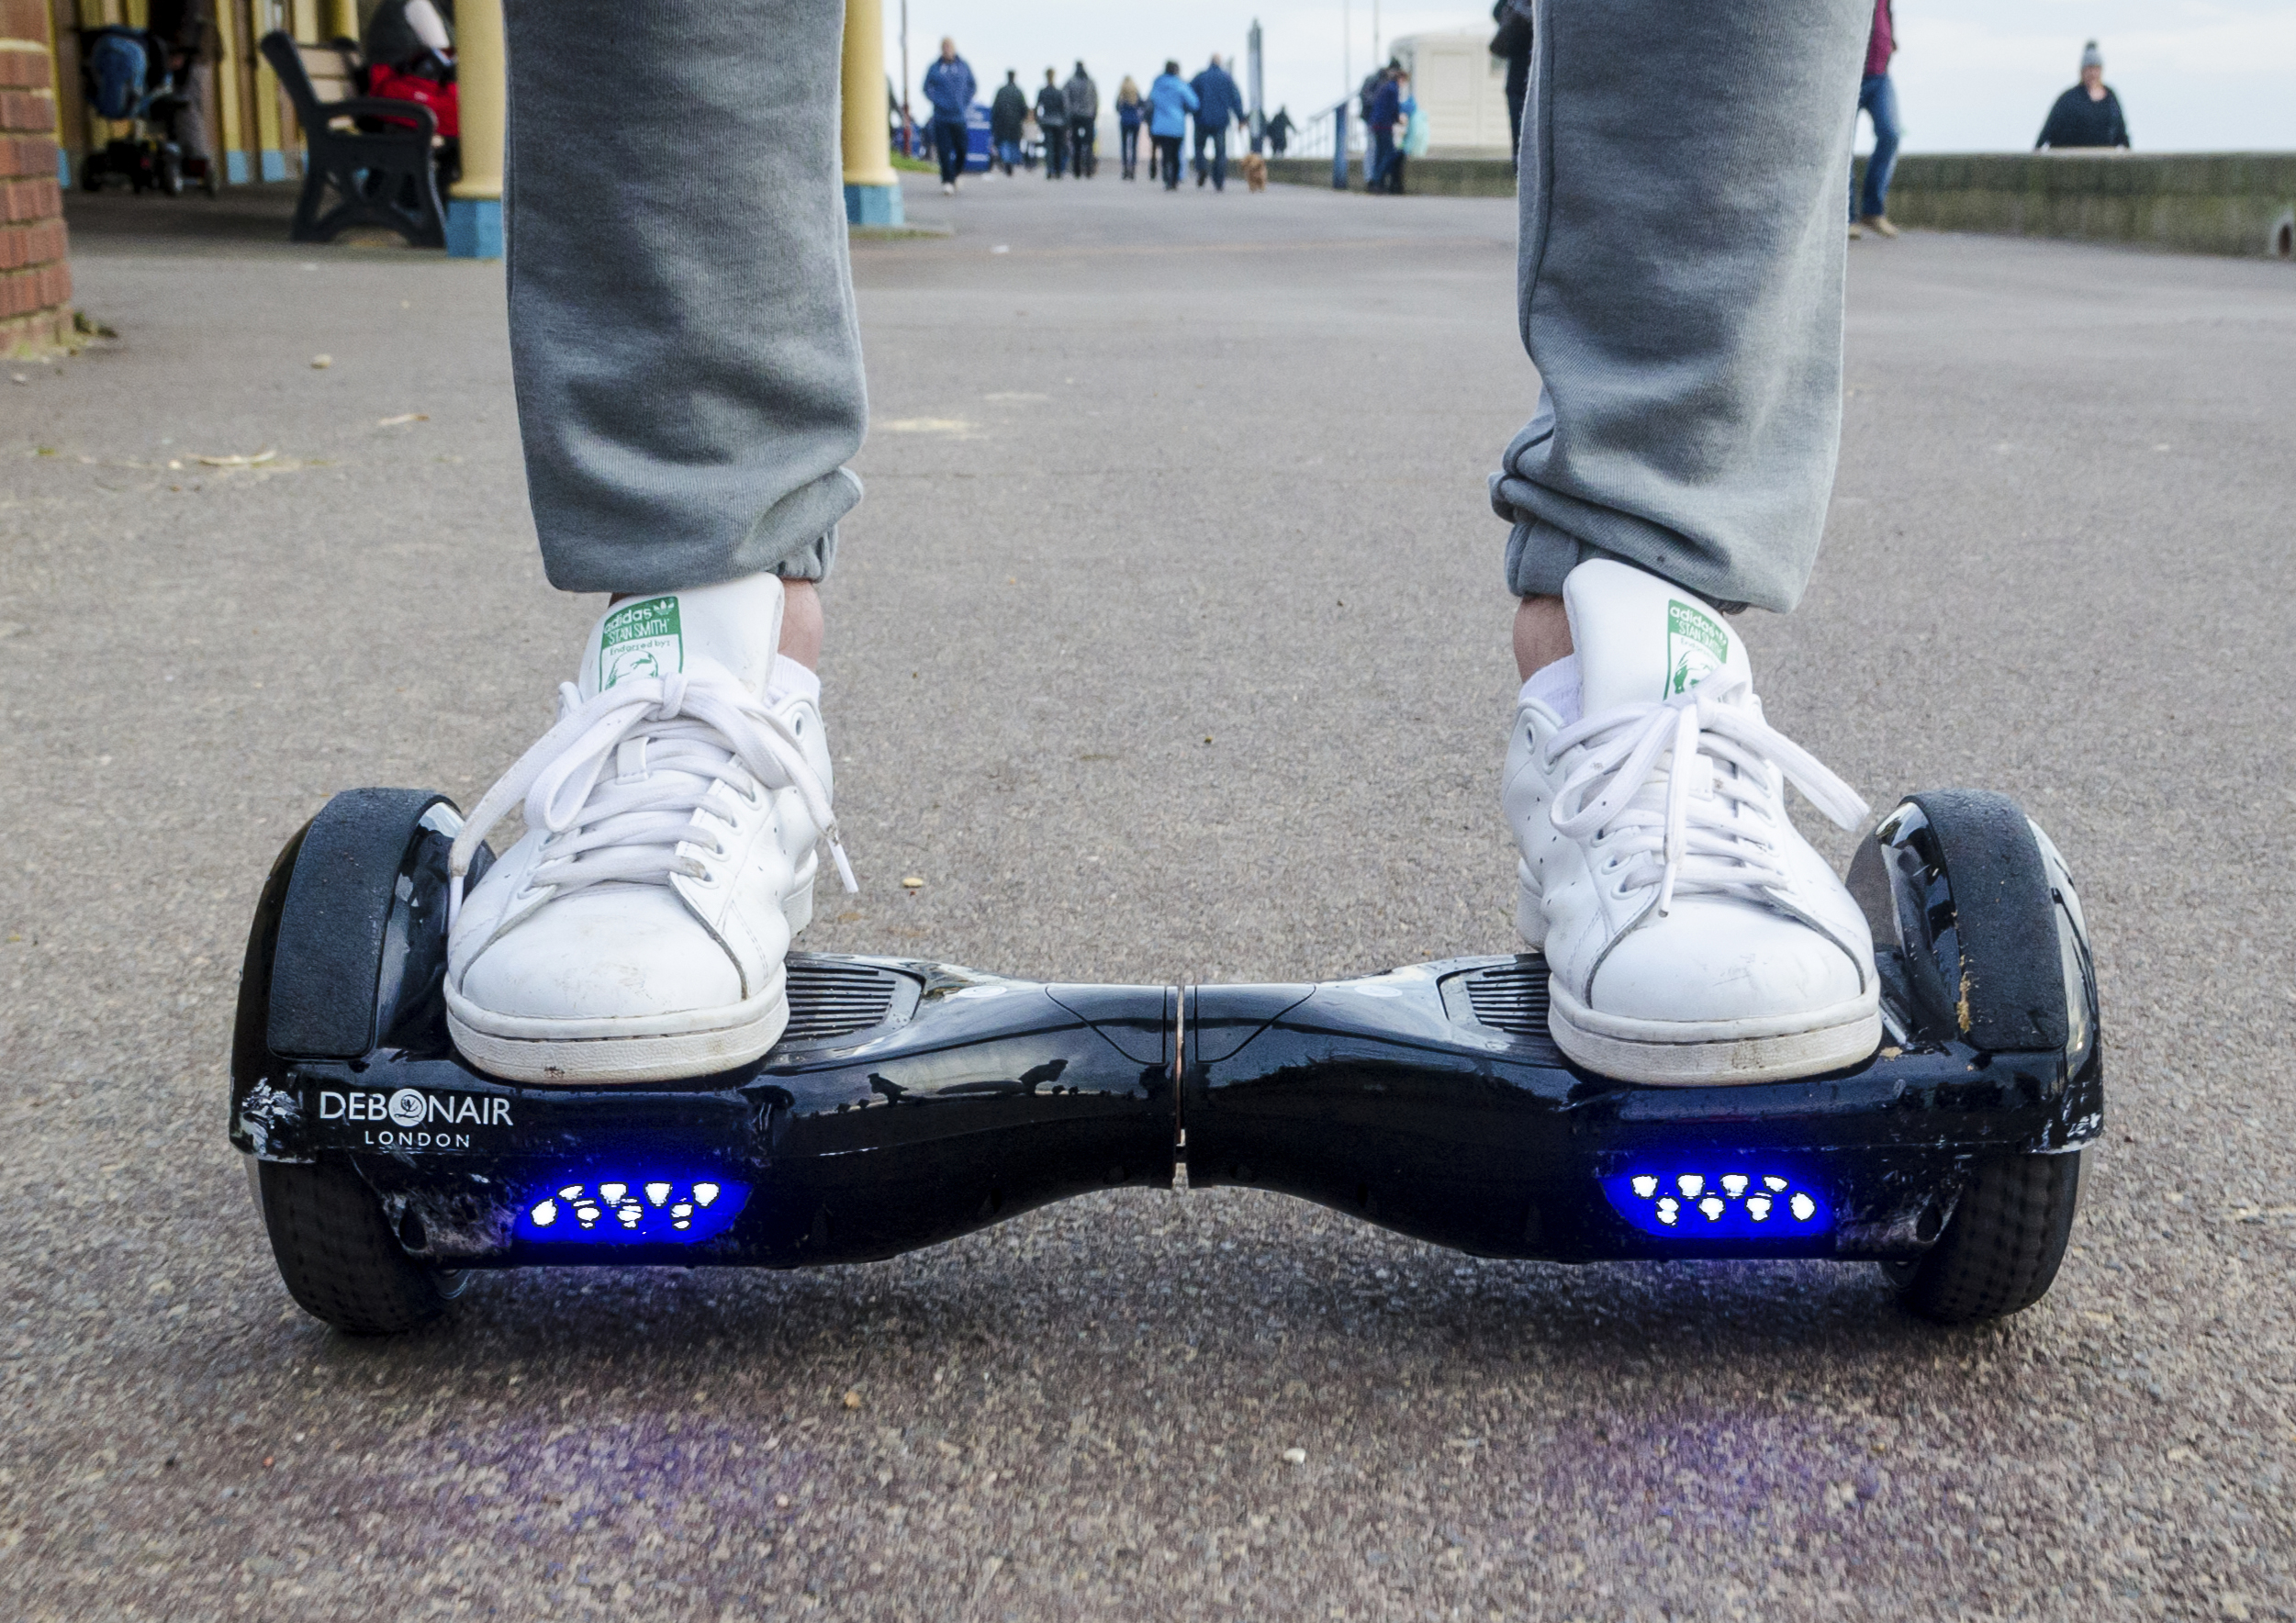 Students, faculty, and staff are discouraged from bringing hoverboards to campus.